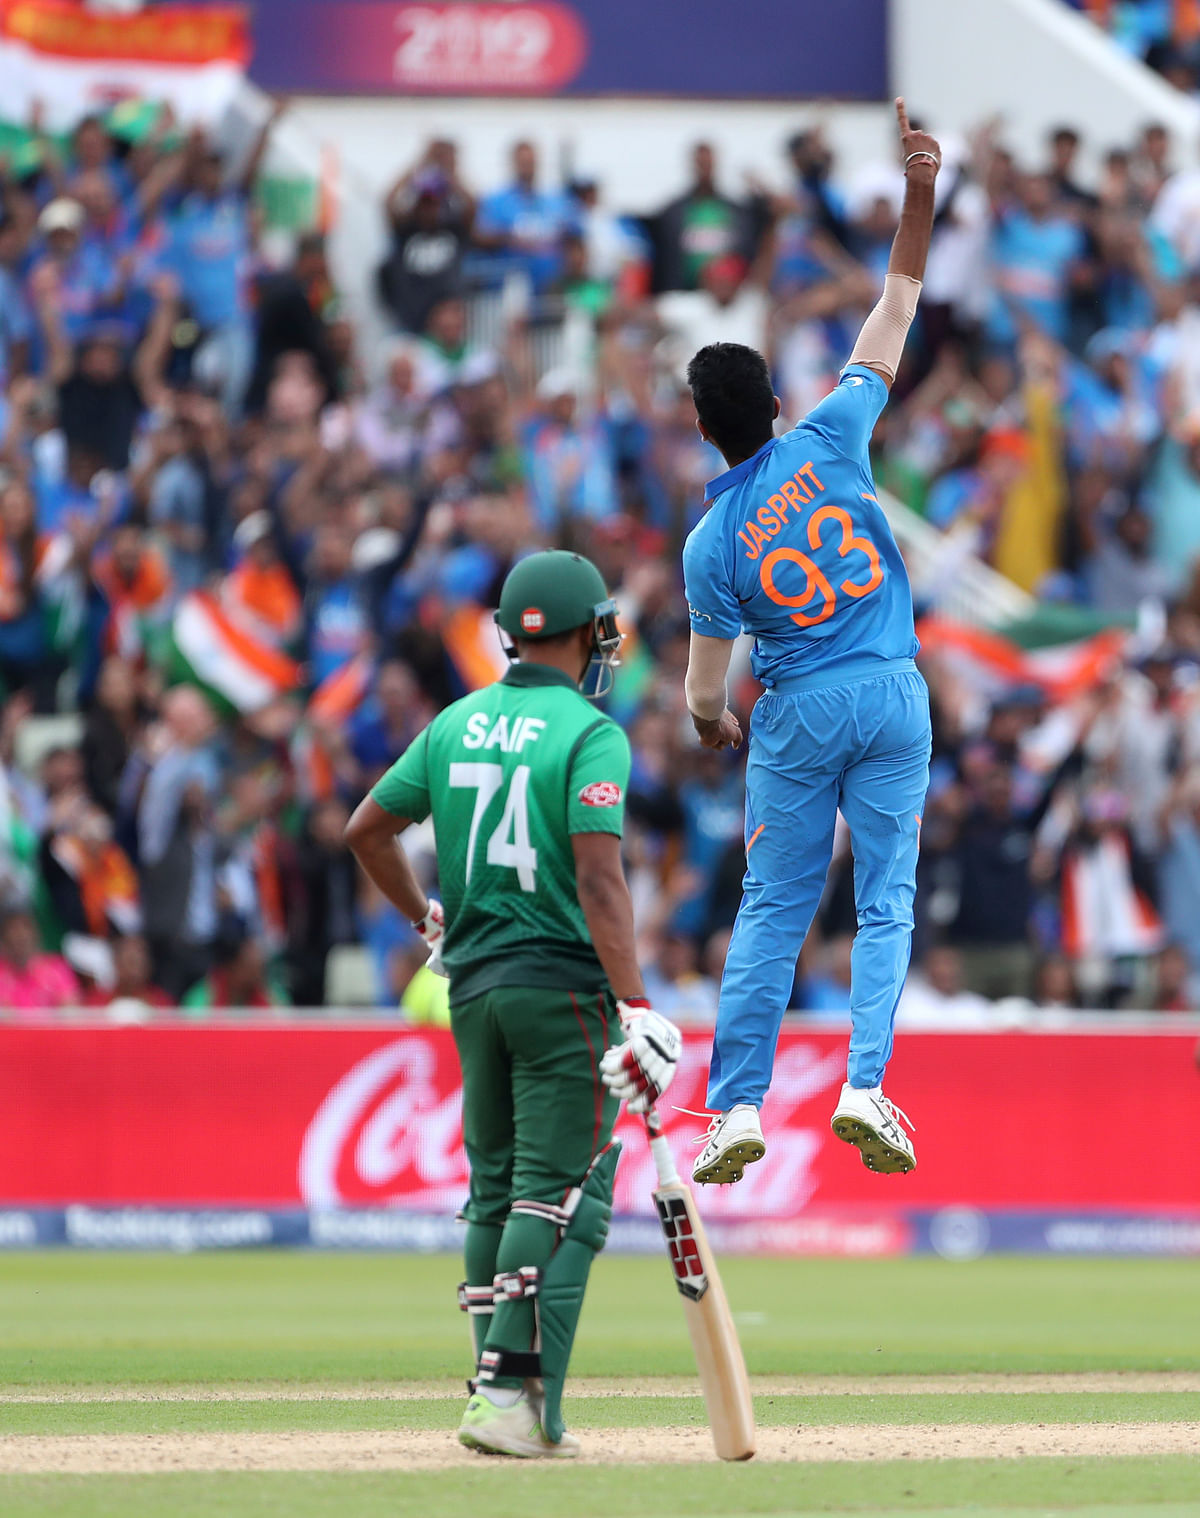 India vs Bangladesh World Cup Highlights As it Happened India Win by